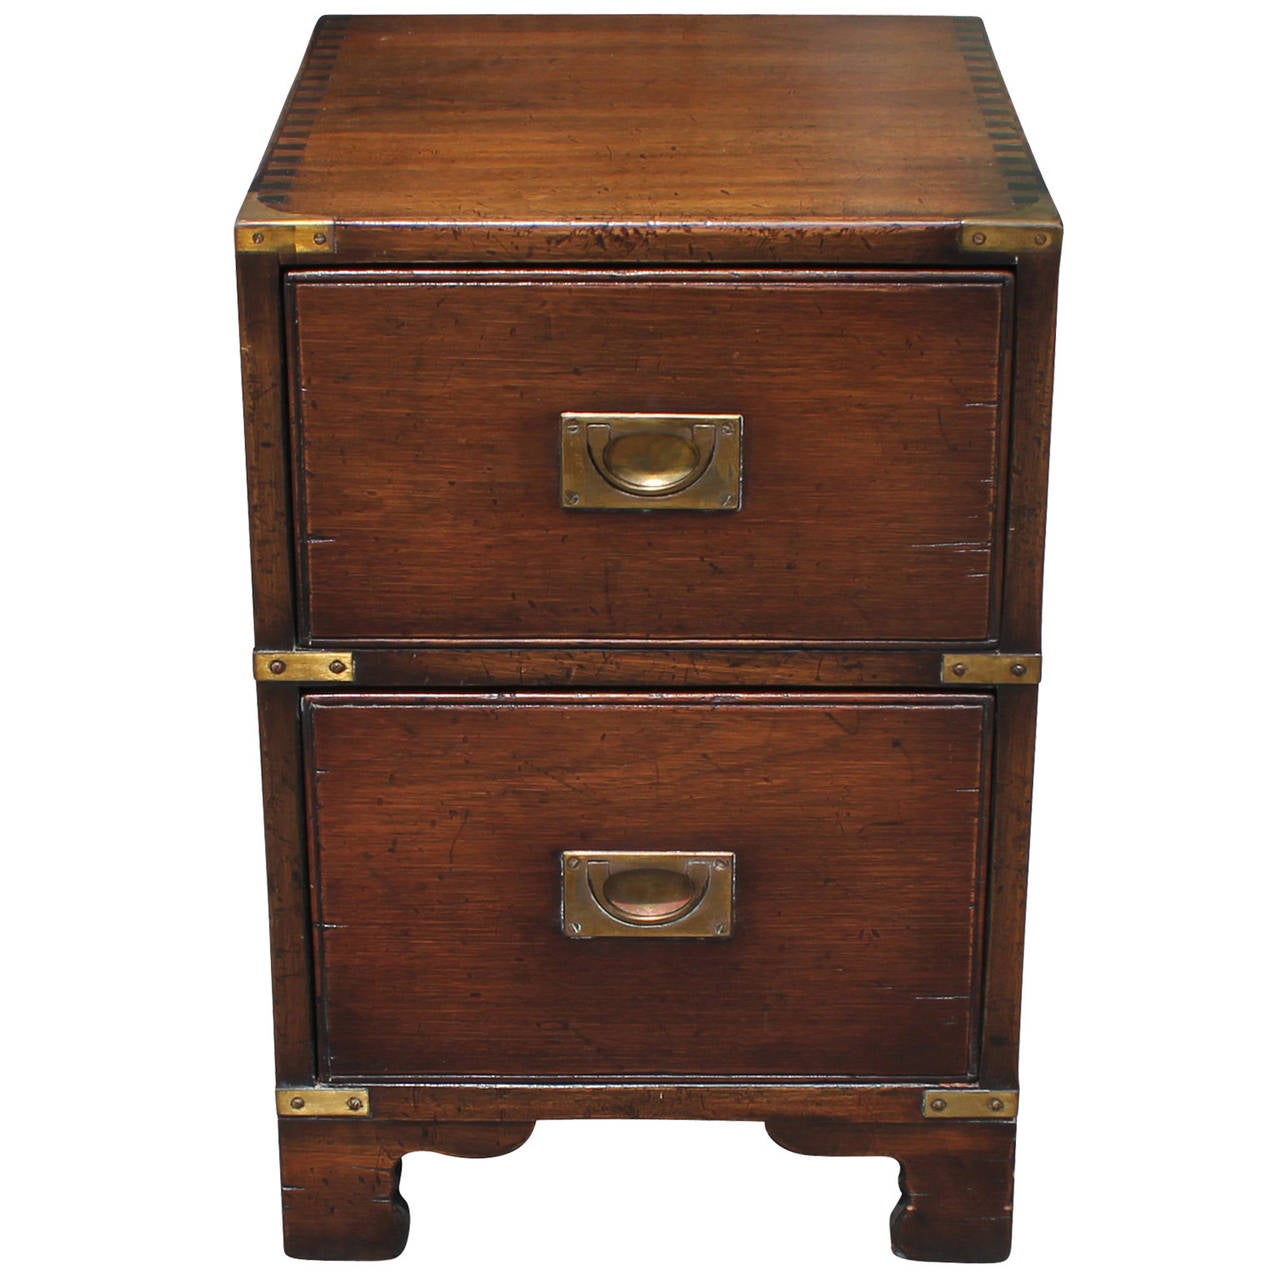 Pair of lovely campaign chest style nightstands or bedside tables. Circa 1900 these campaign chest are superb quality. Dovetailed top adds visual interest.